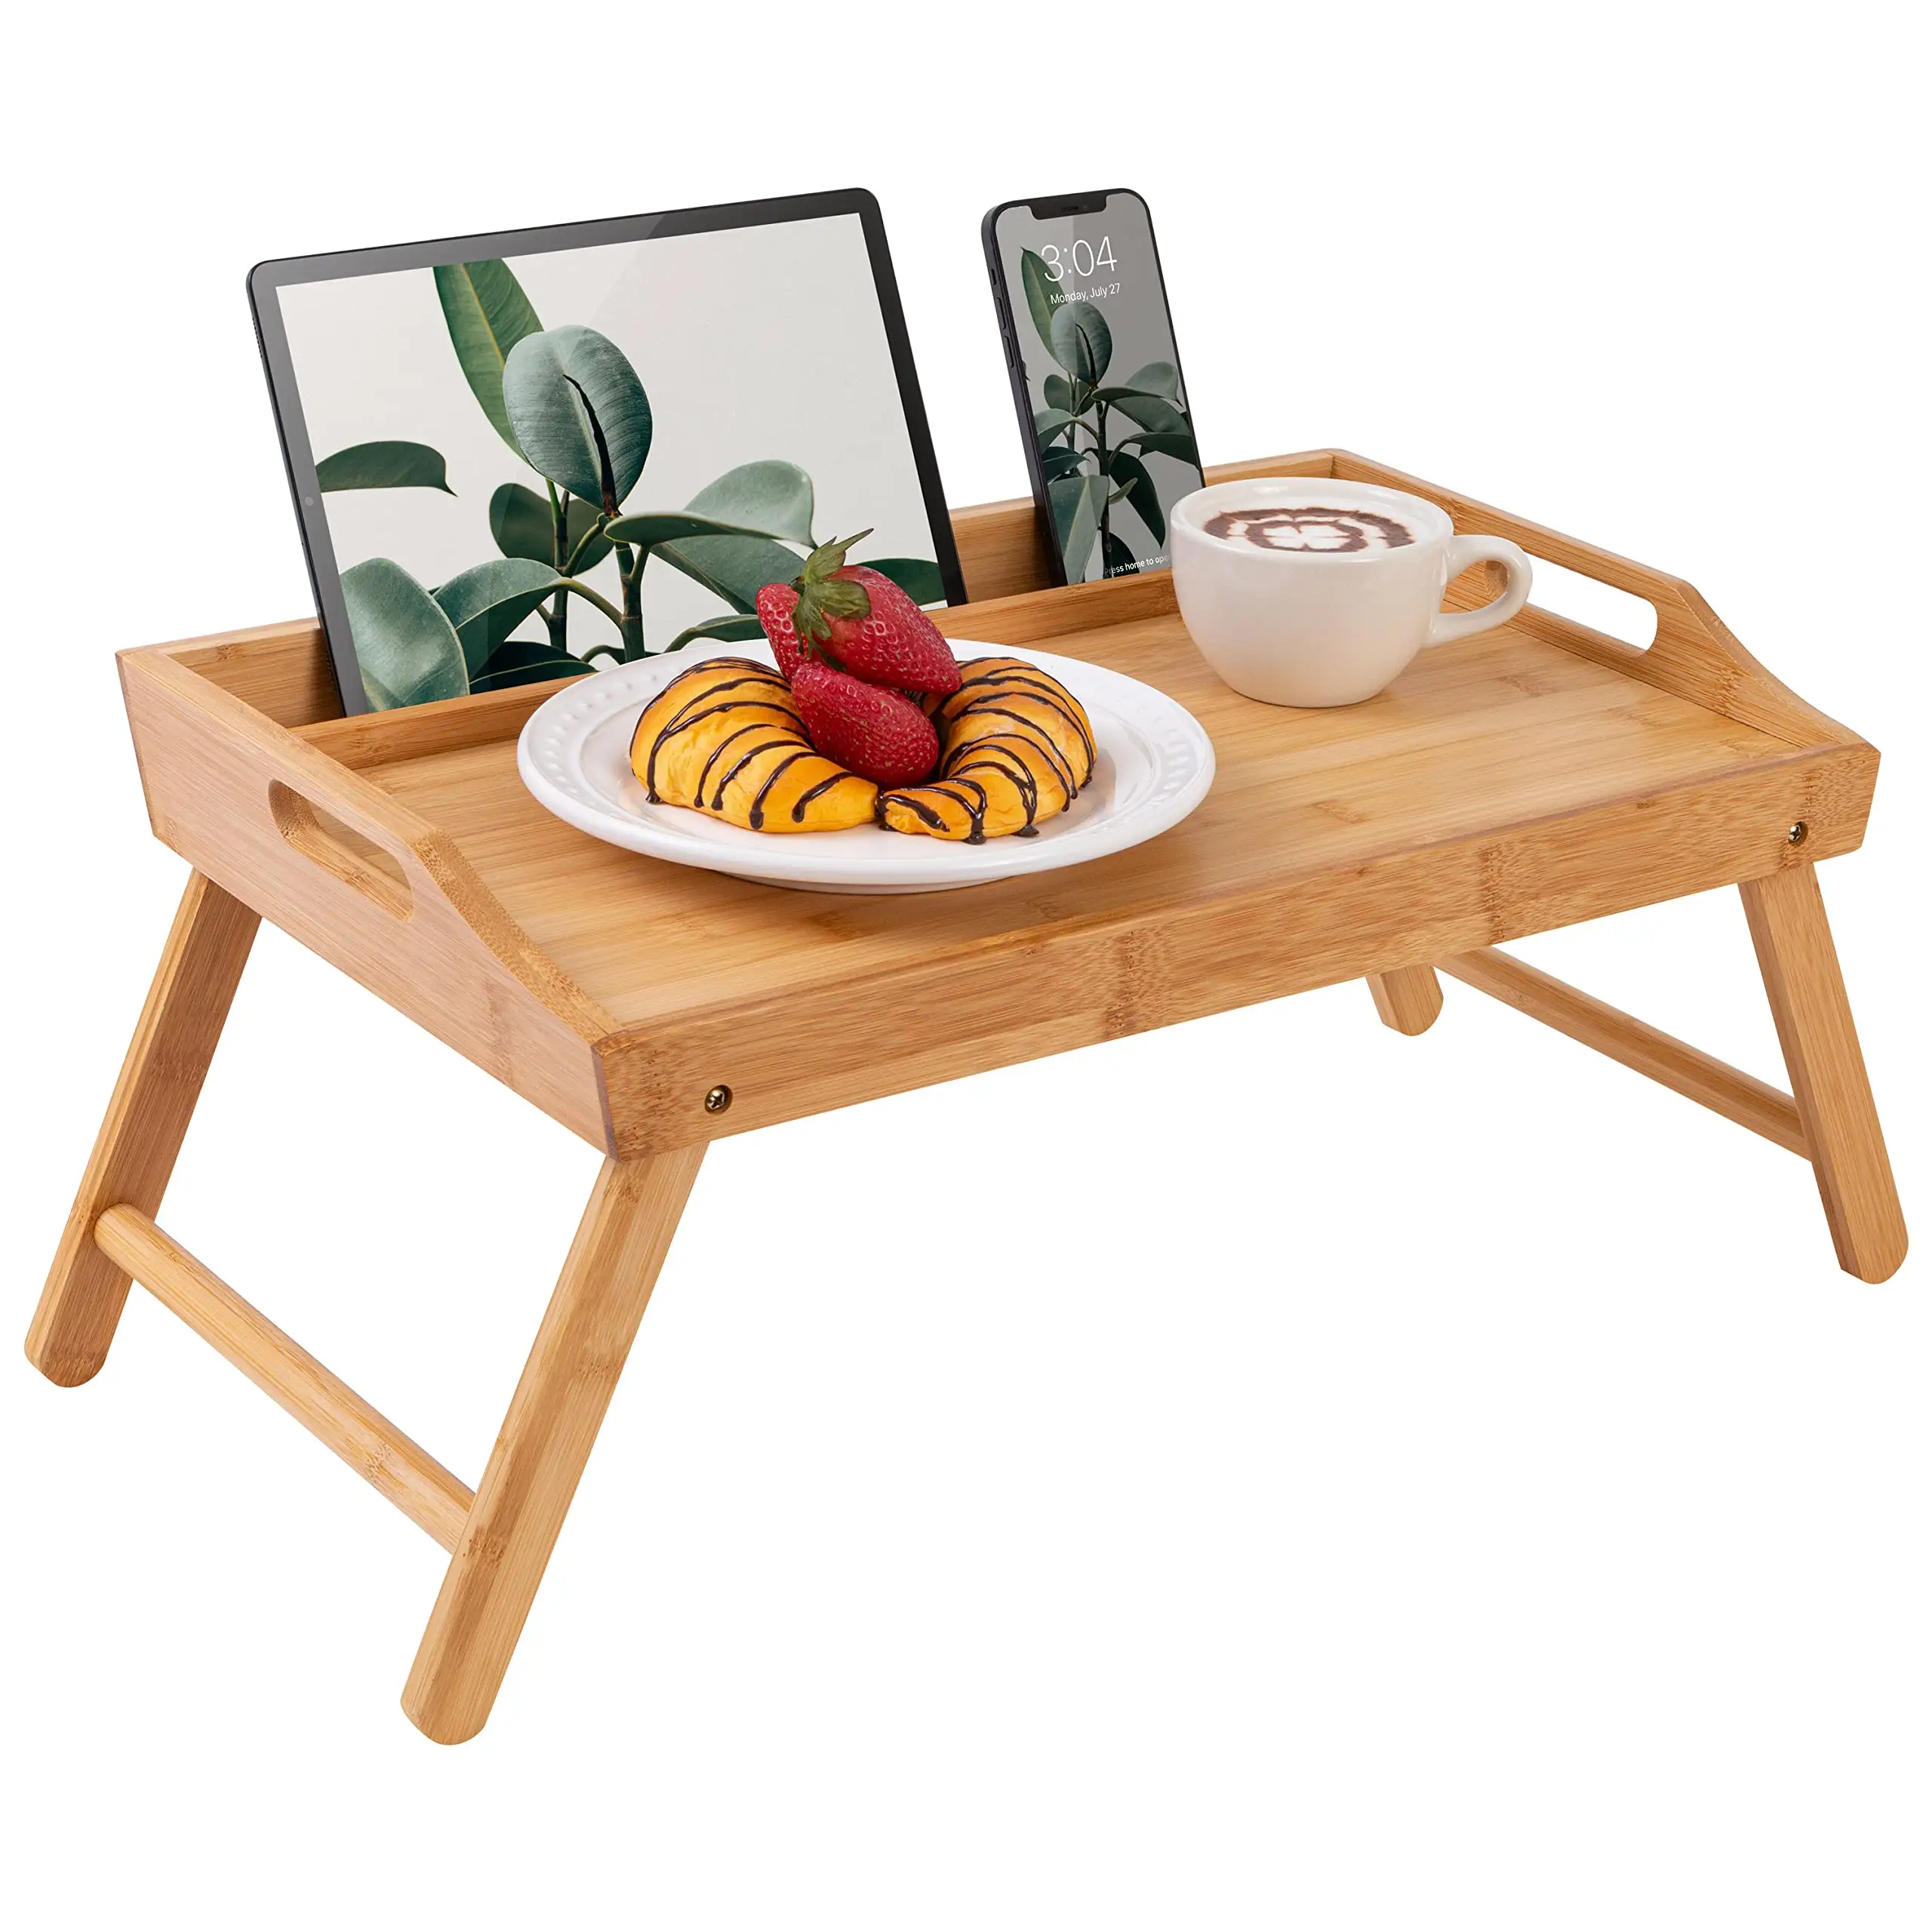 Hot Sells Bamboo Wood Bed Tray Desktop Dock Wooden Mount Display Portable Laptop Desk for Bed